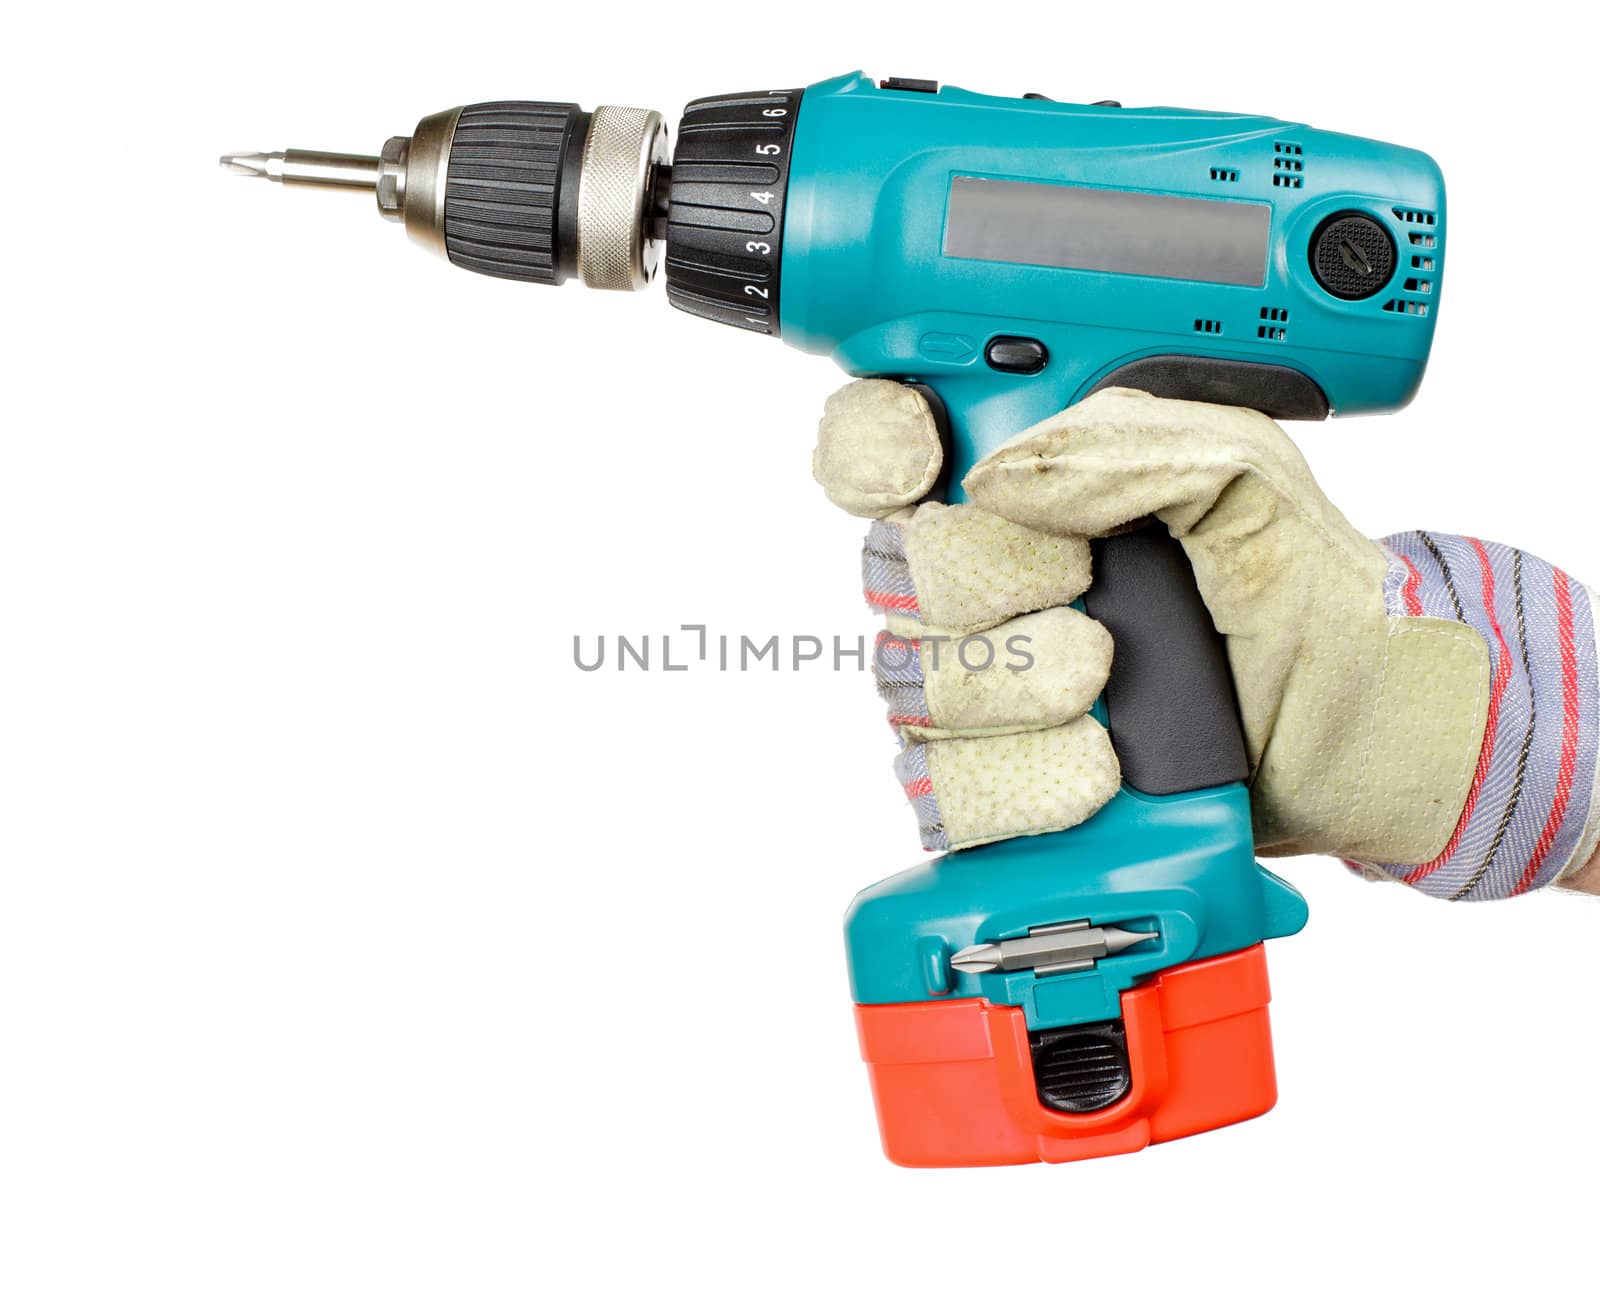 Hand wearing protective glove holding battery-powered electric drill on white background